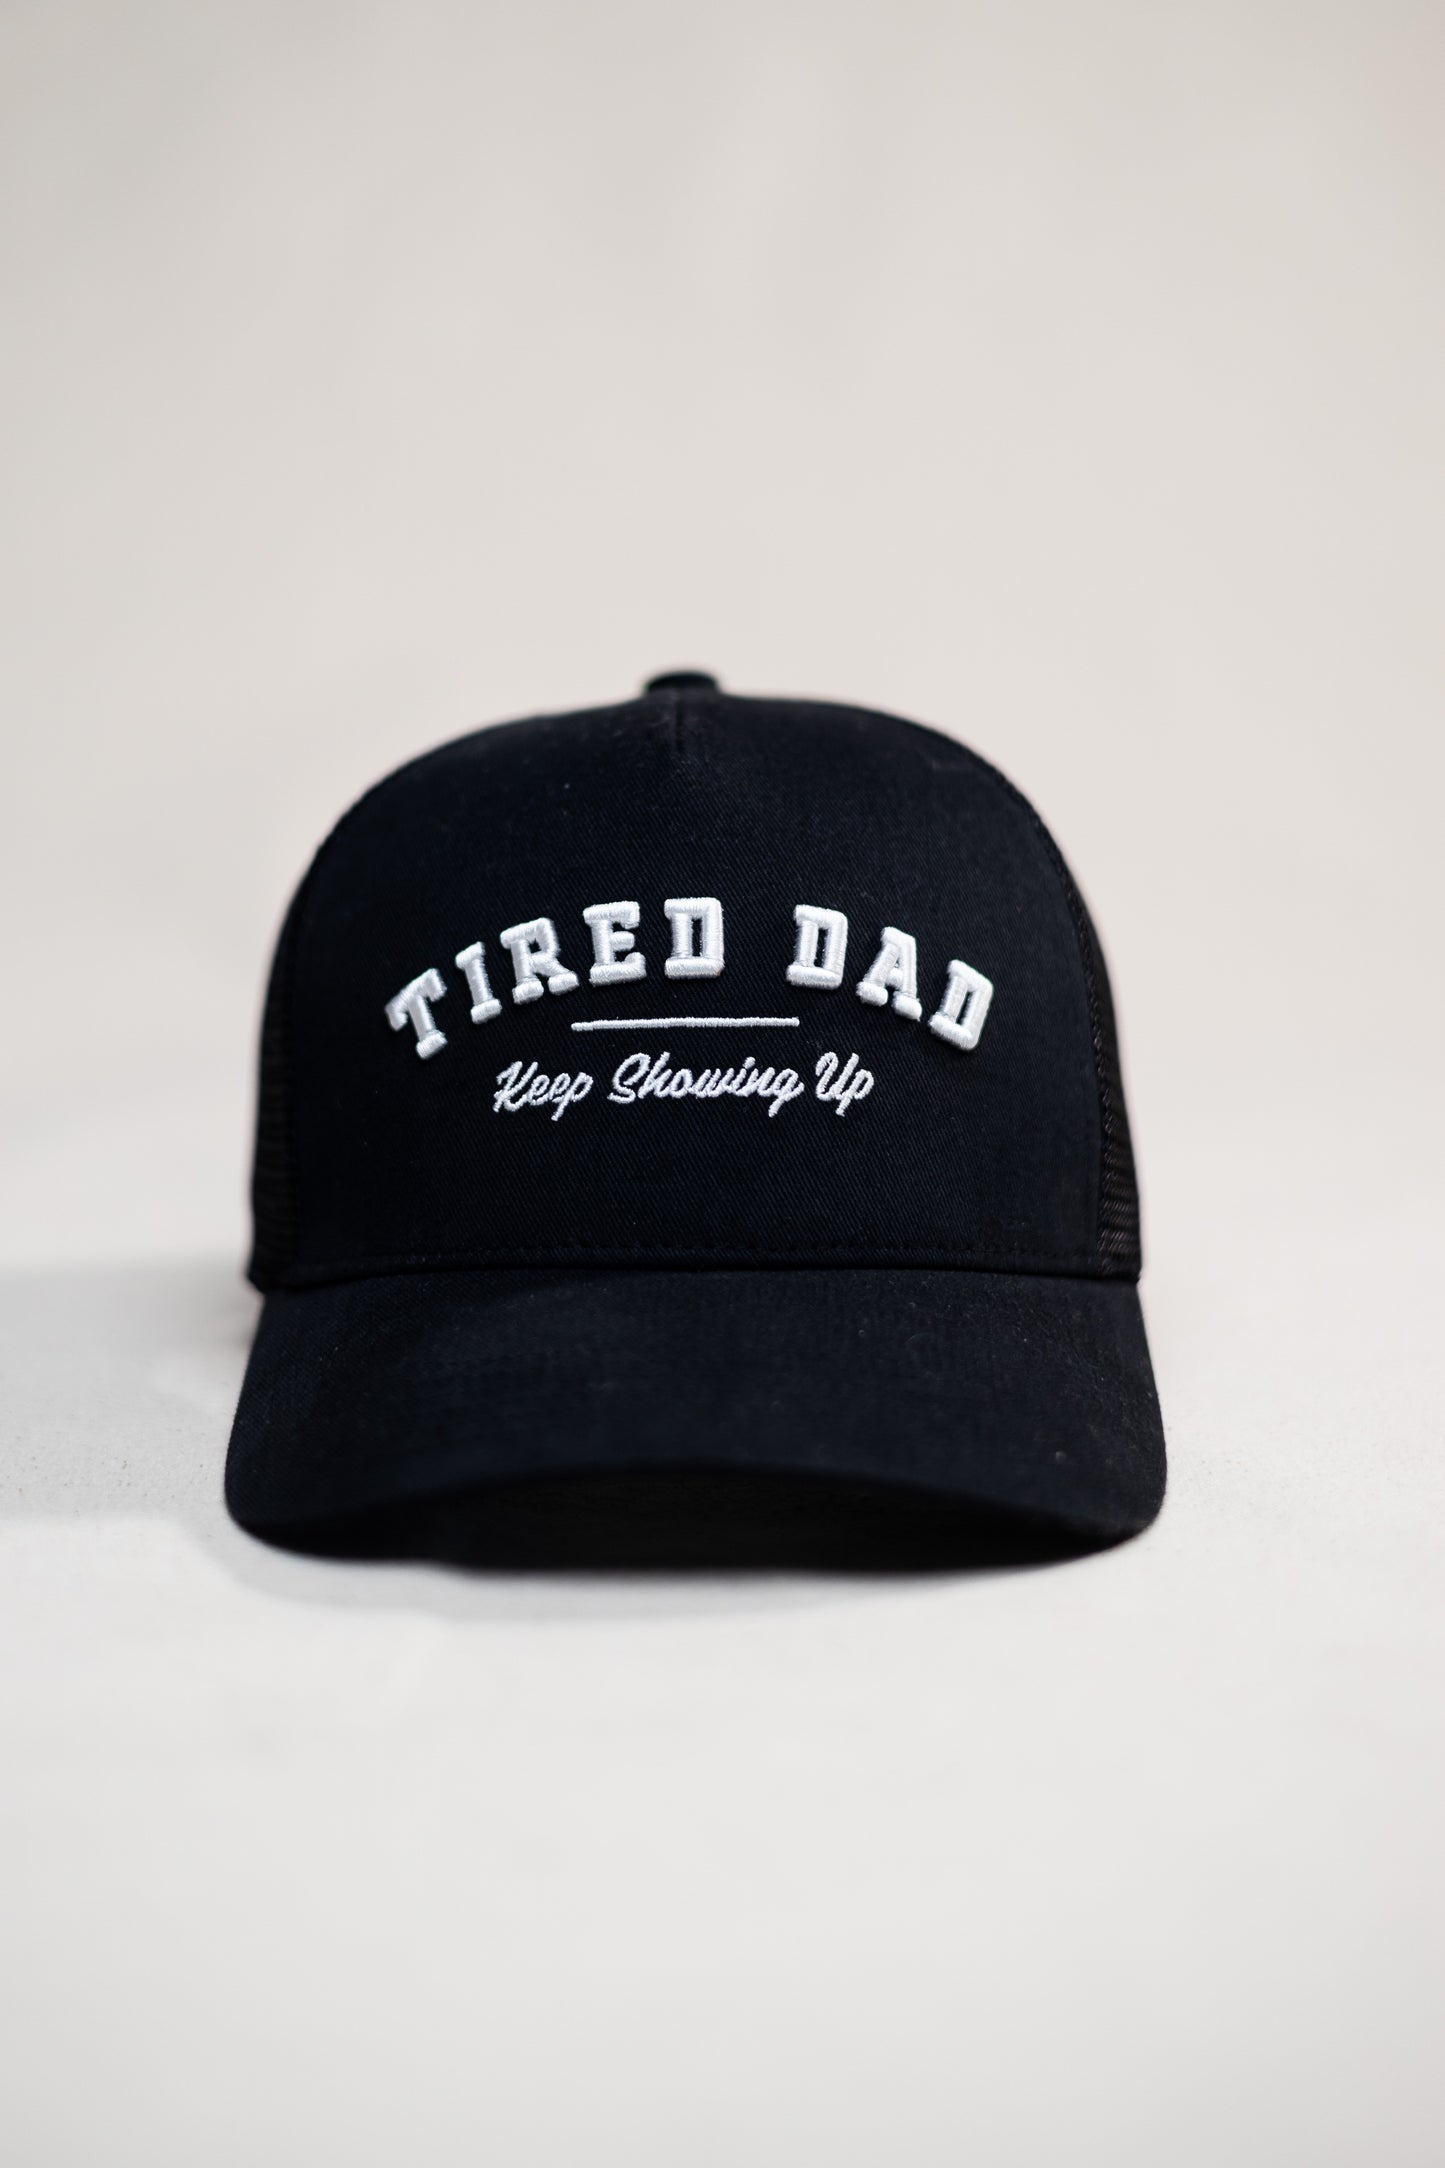 Tired Dad // Keep Showing Up // All Black Trucker